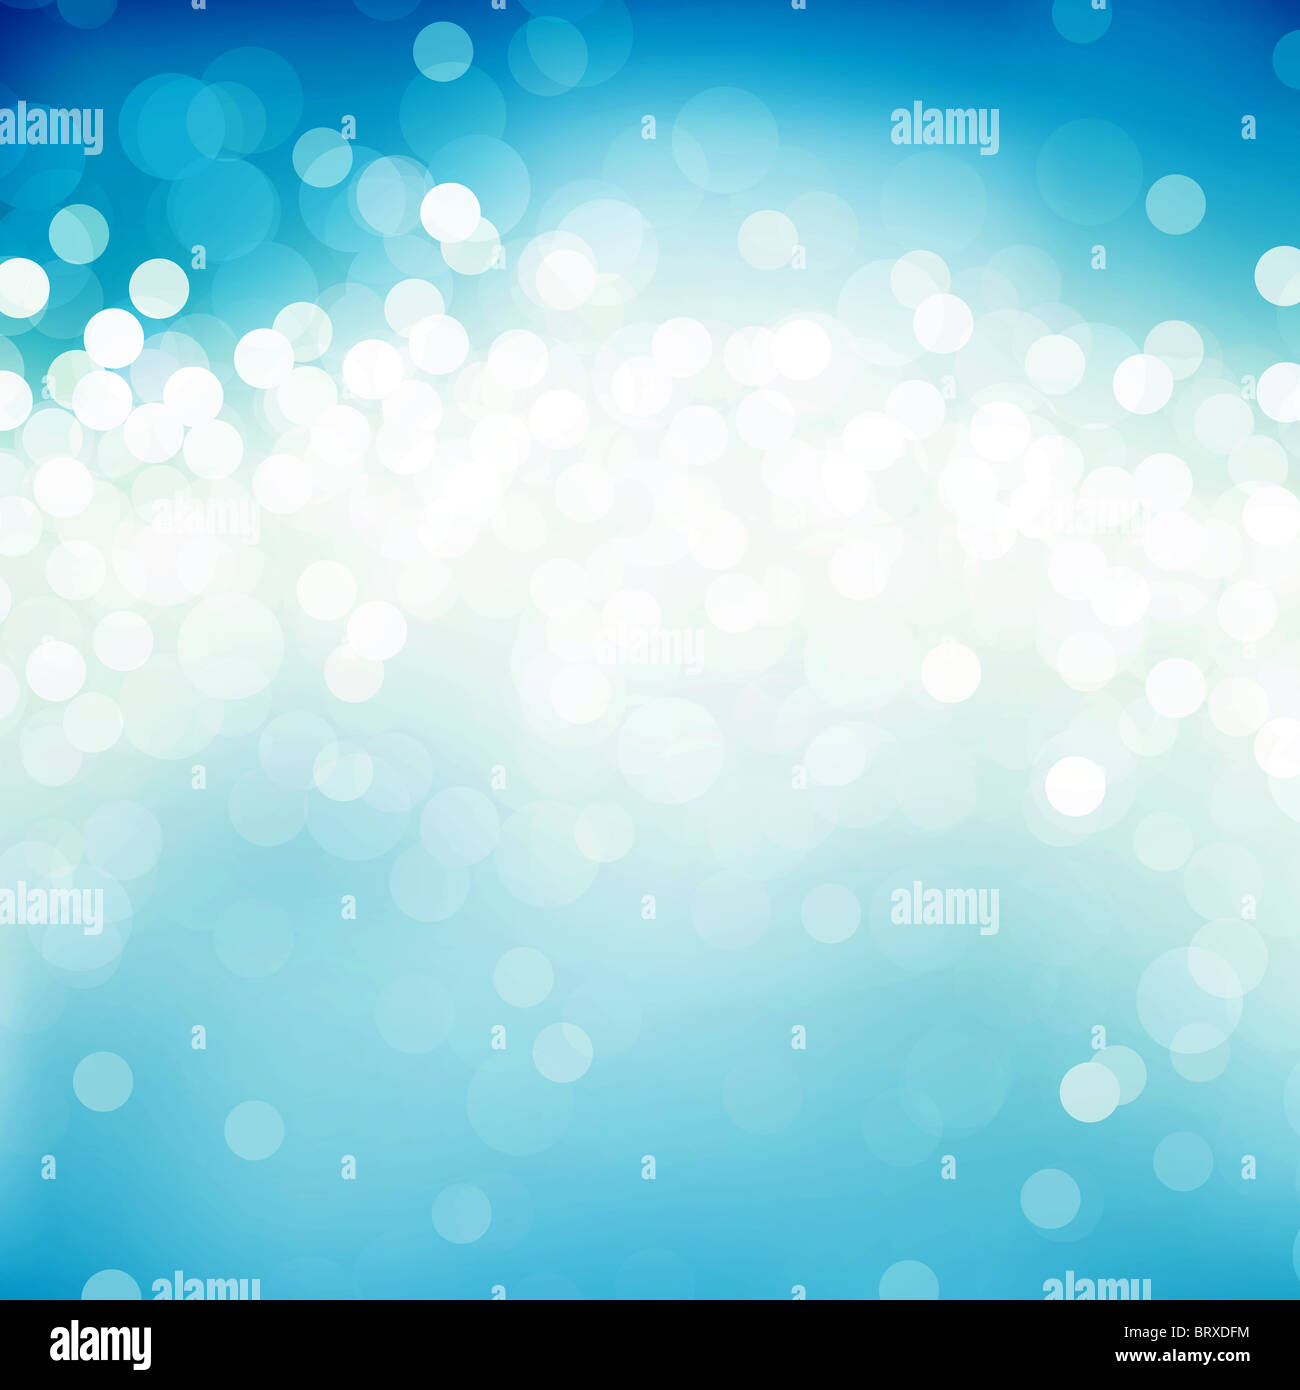 Abstract background of light dots on blue Stock Photo